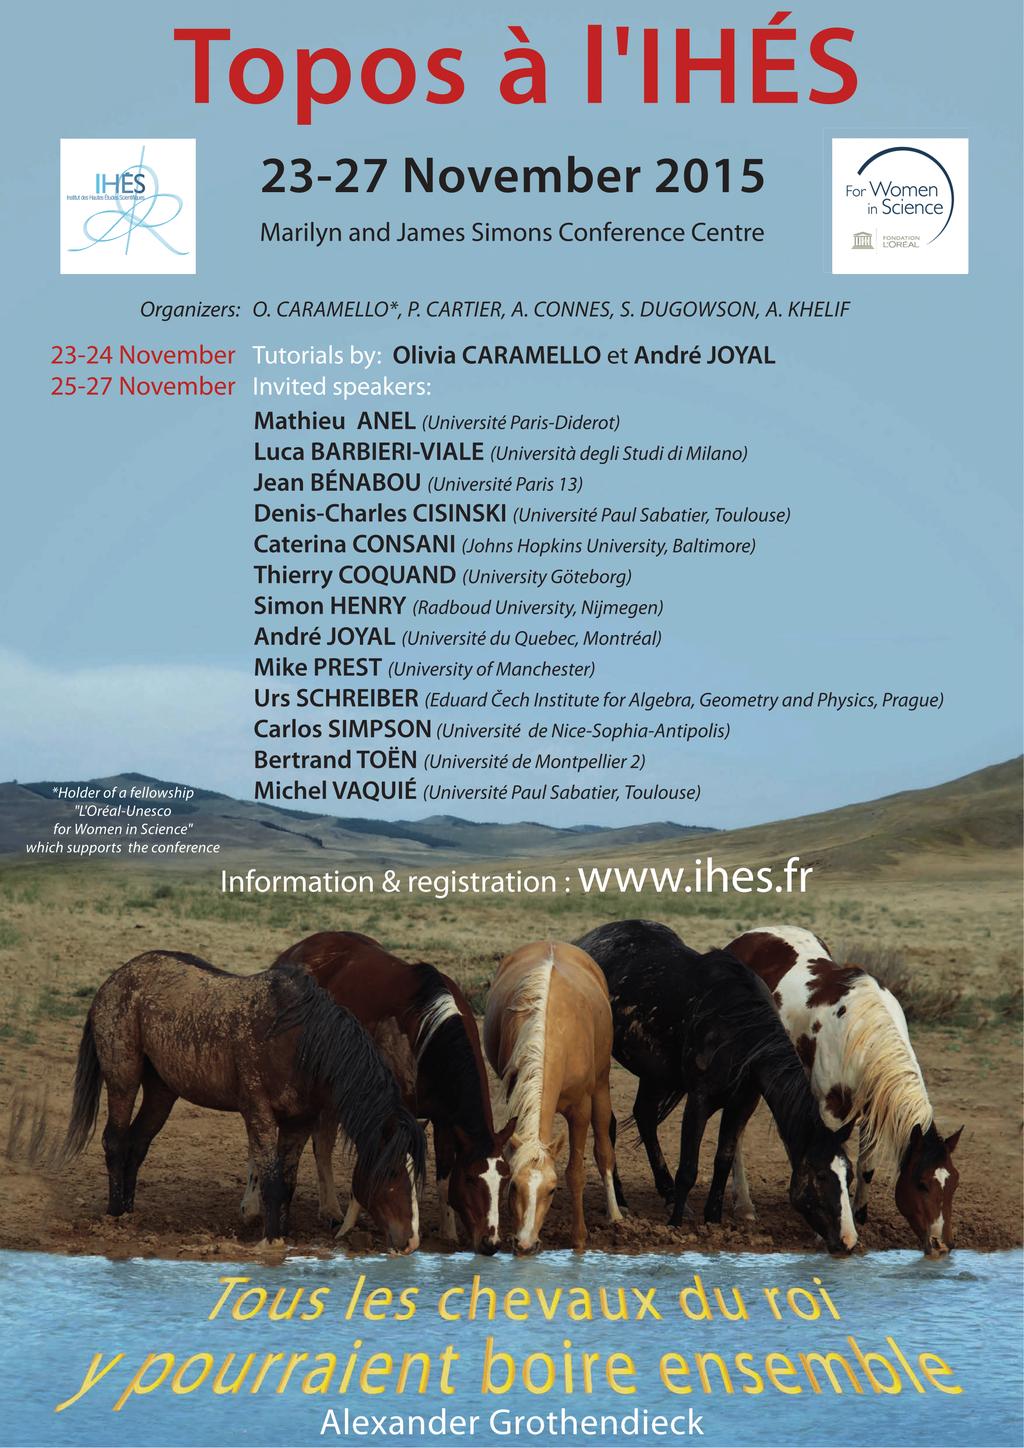 International conference on topos